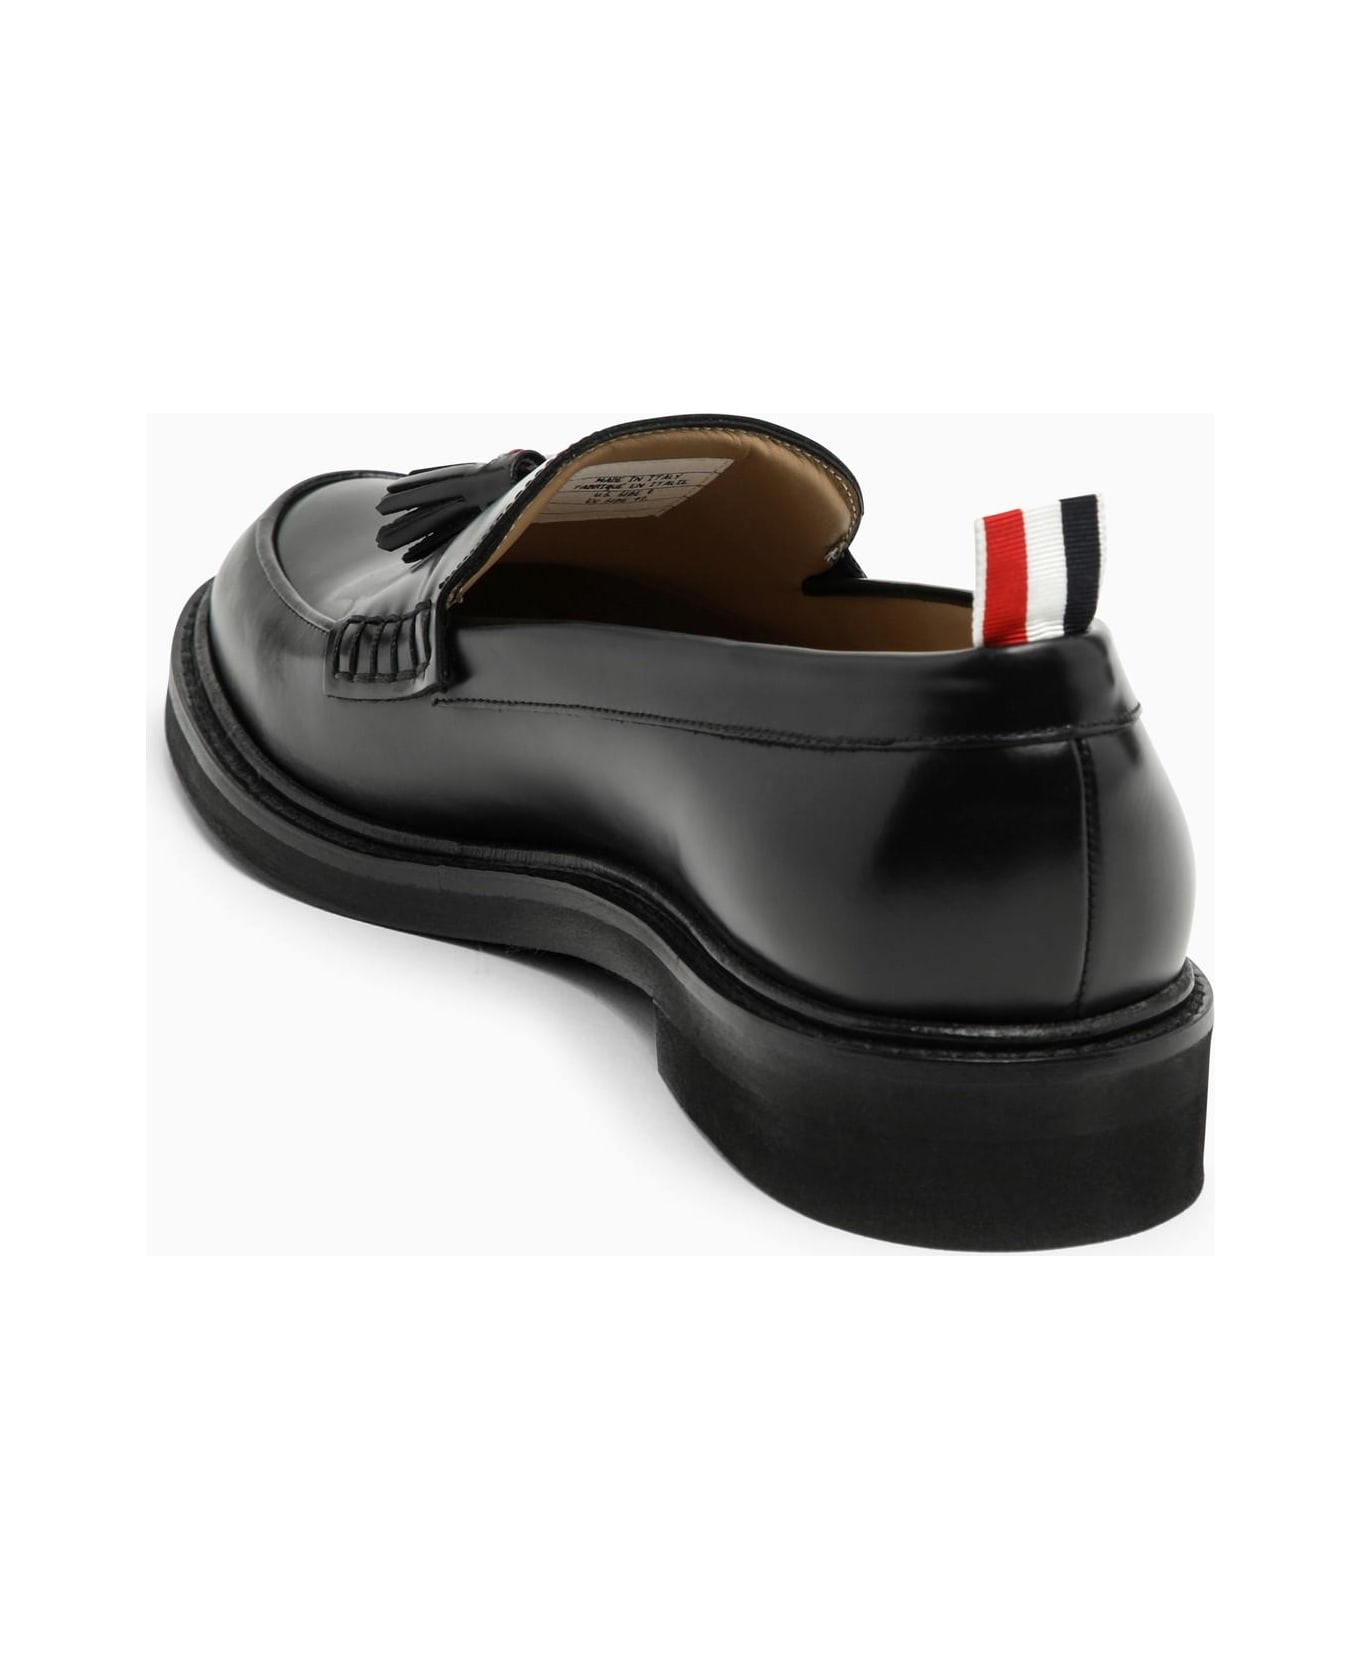 Thom Browne Black Leather Moccasin With Tassels